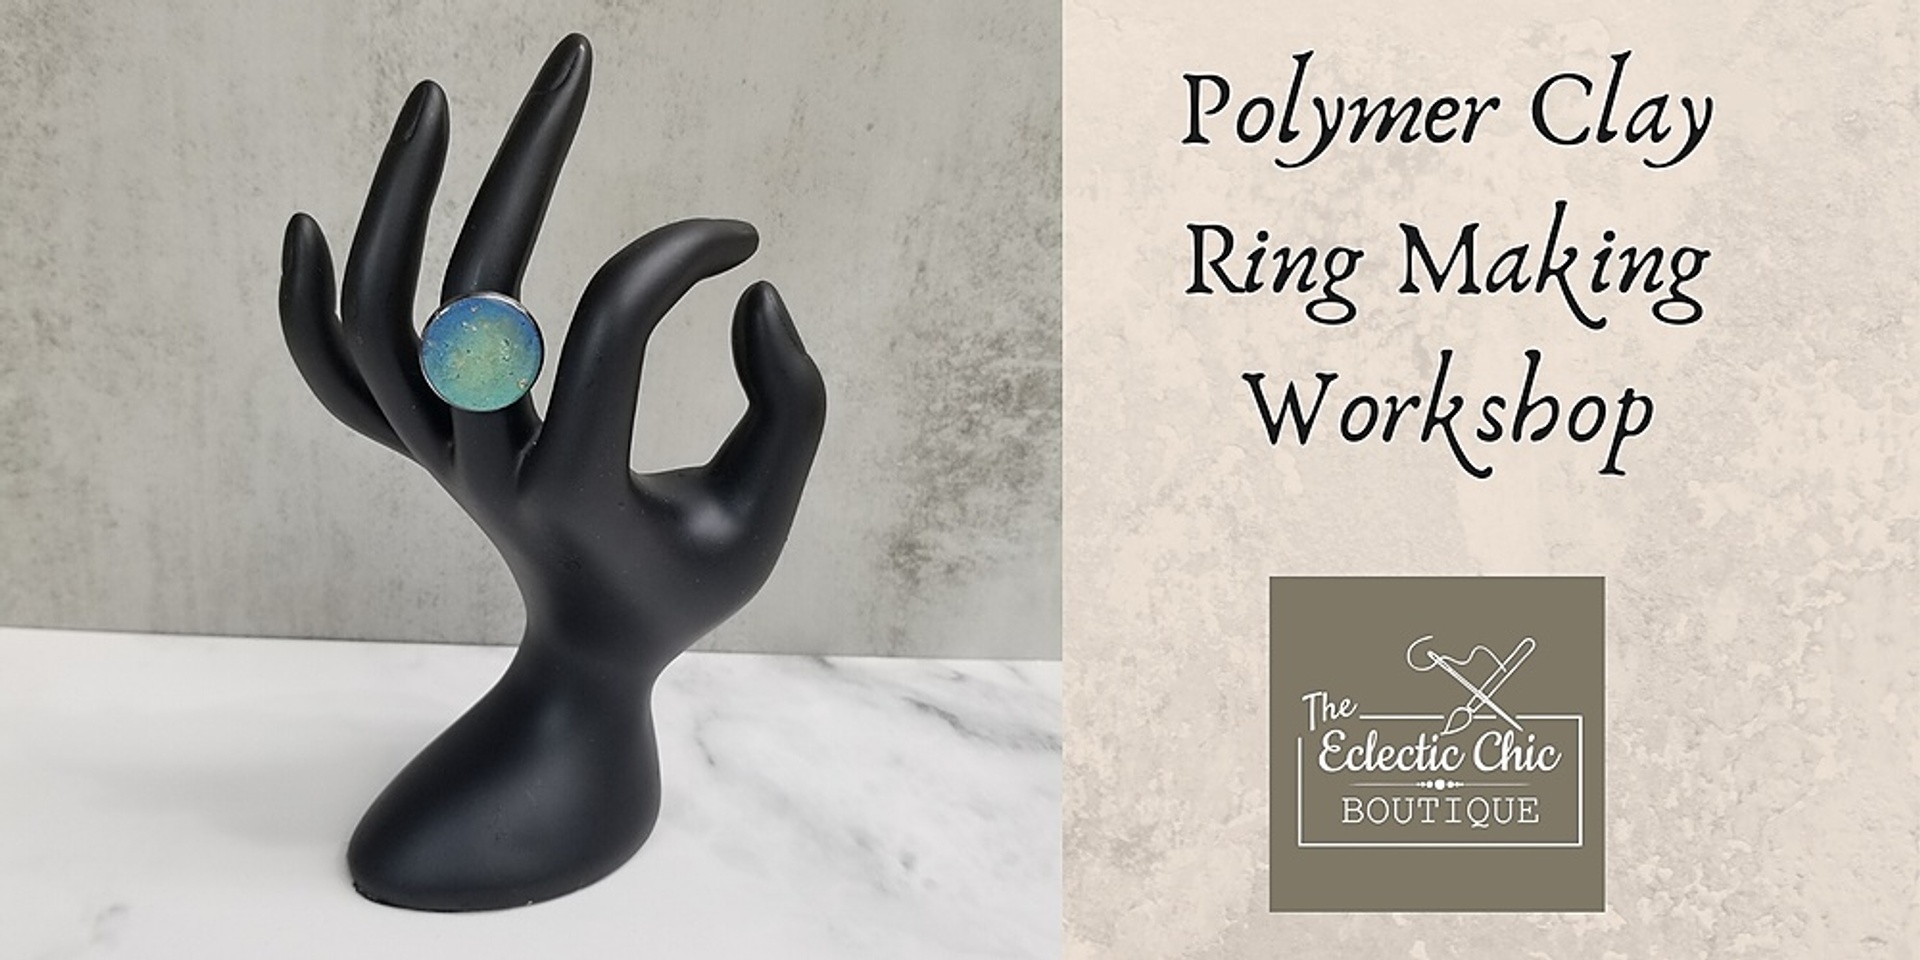 Polymer Clay Ring Making Workshop